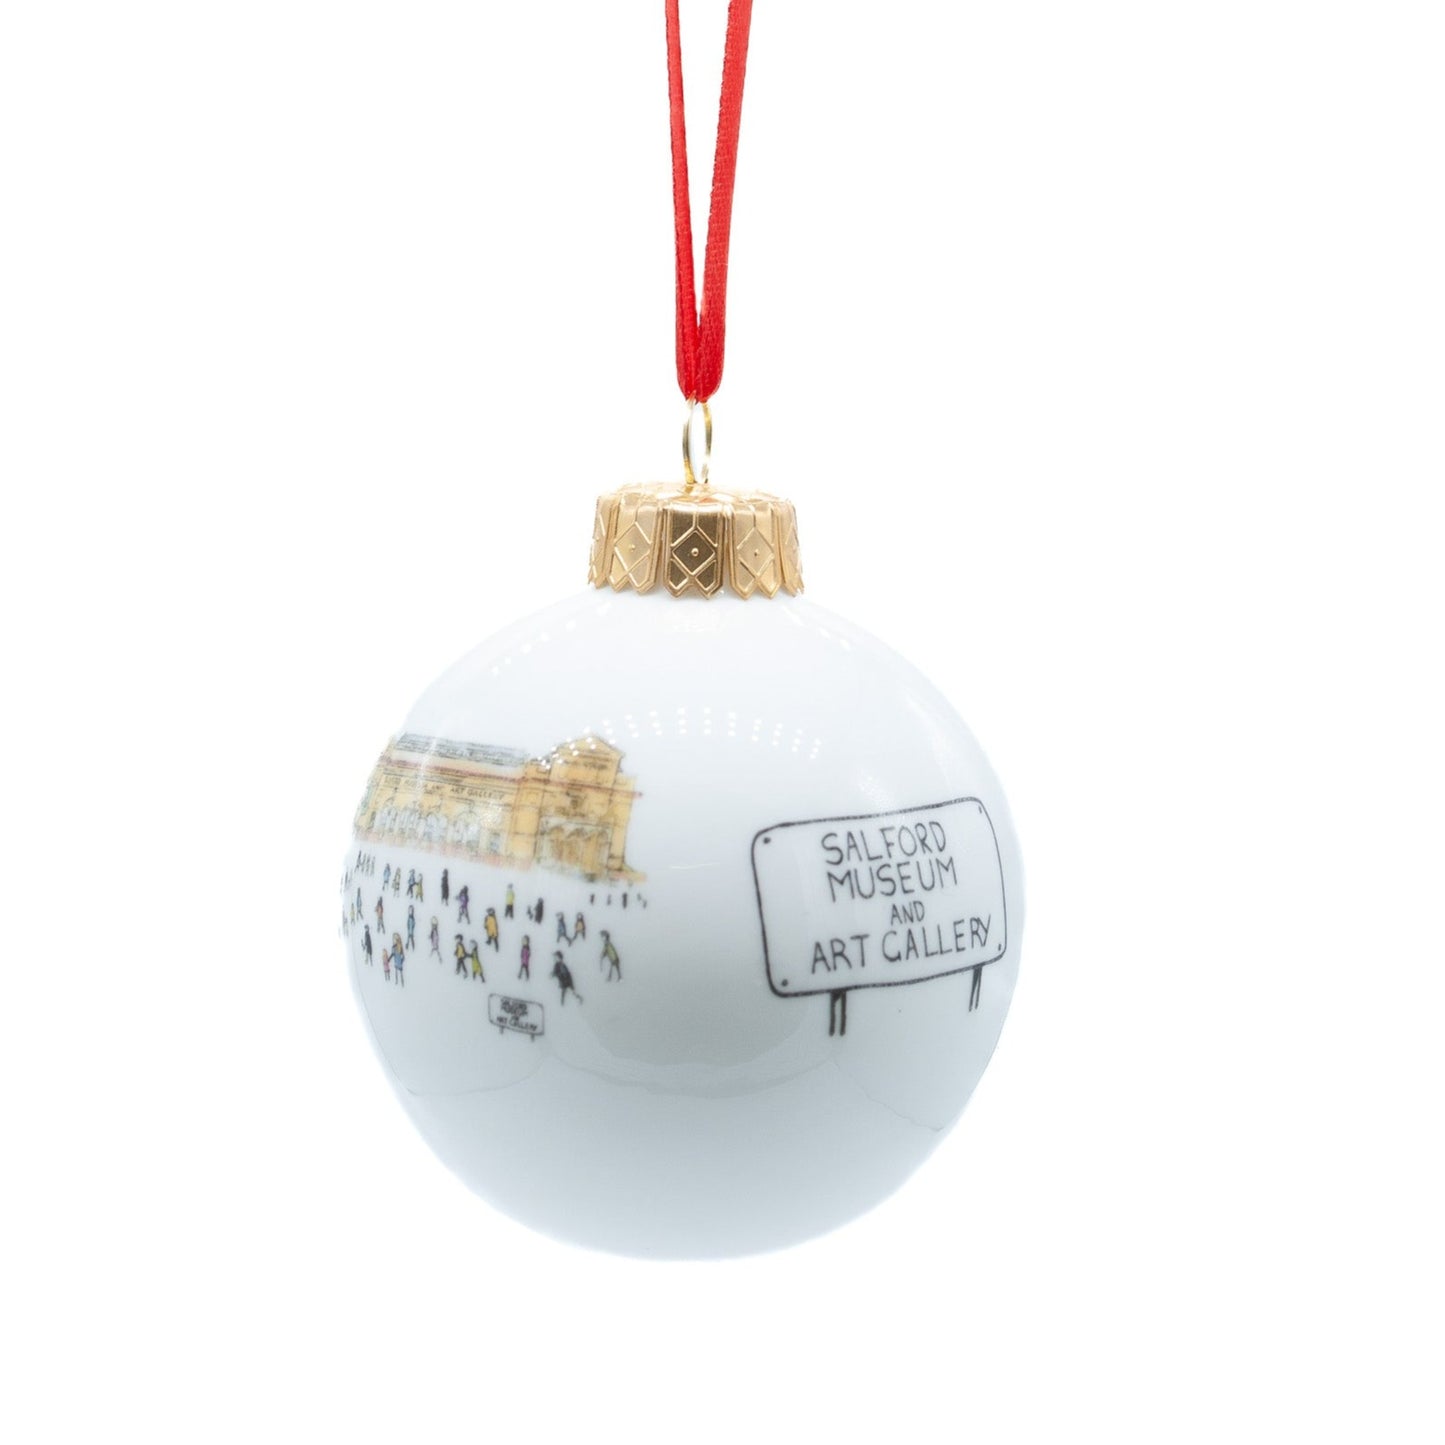 Salford Museum Ceramic Christmas Bauble by Foley Pottery